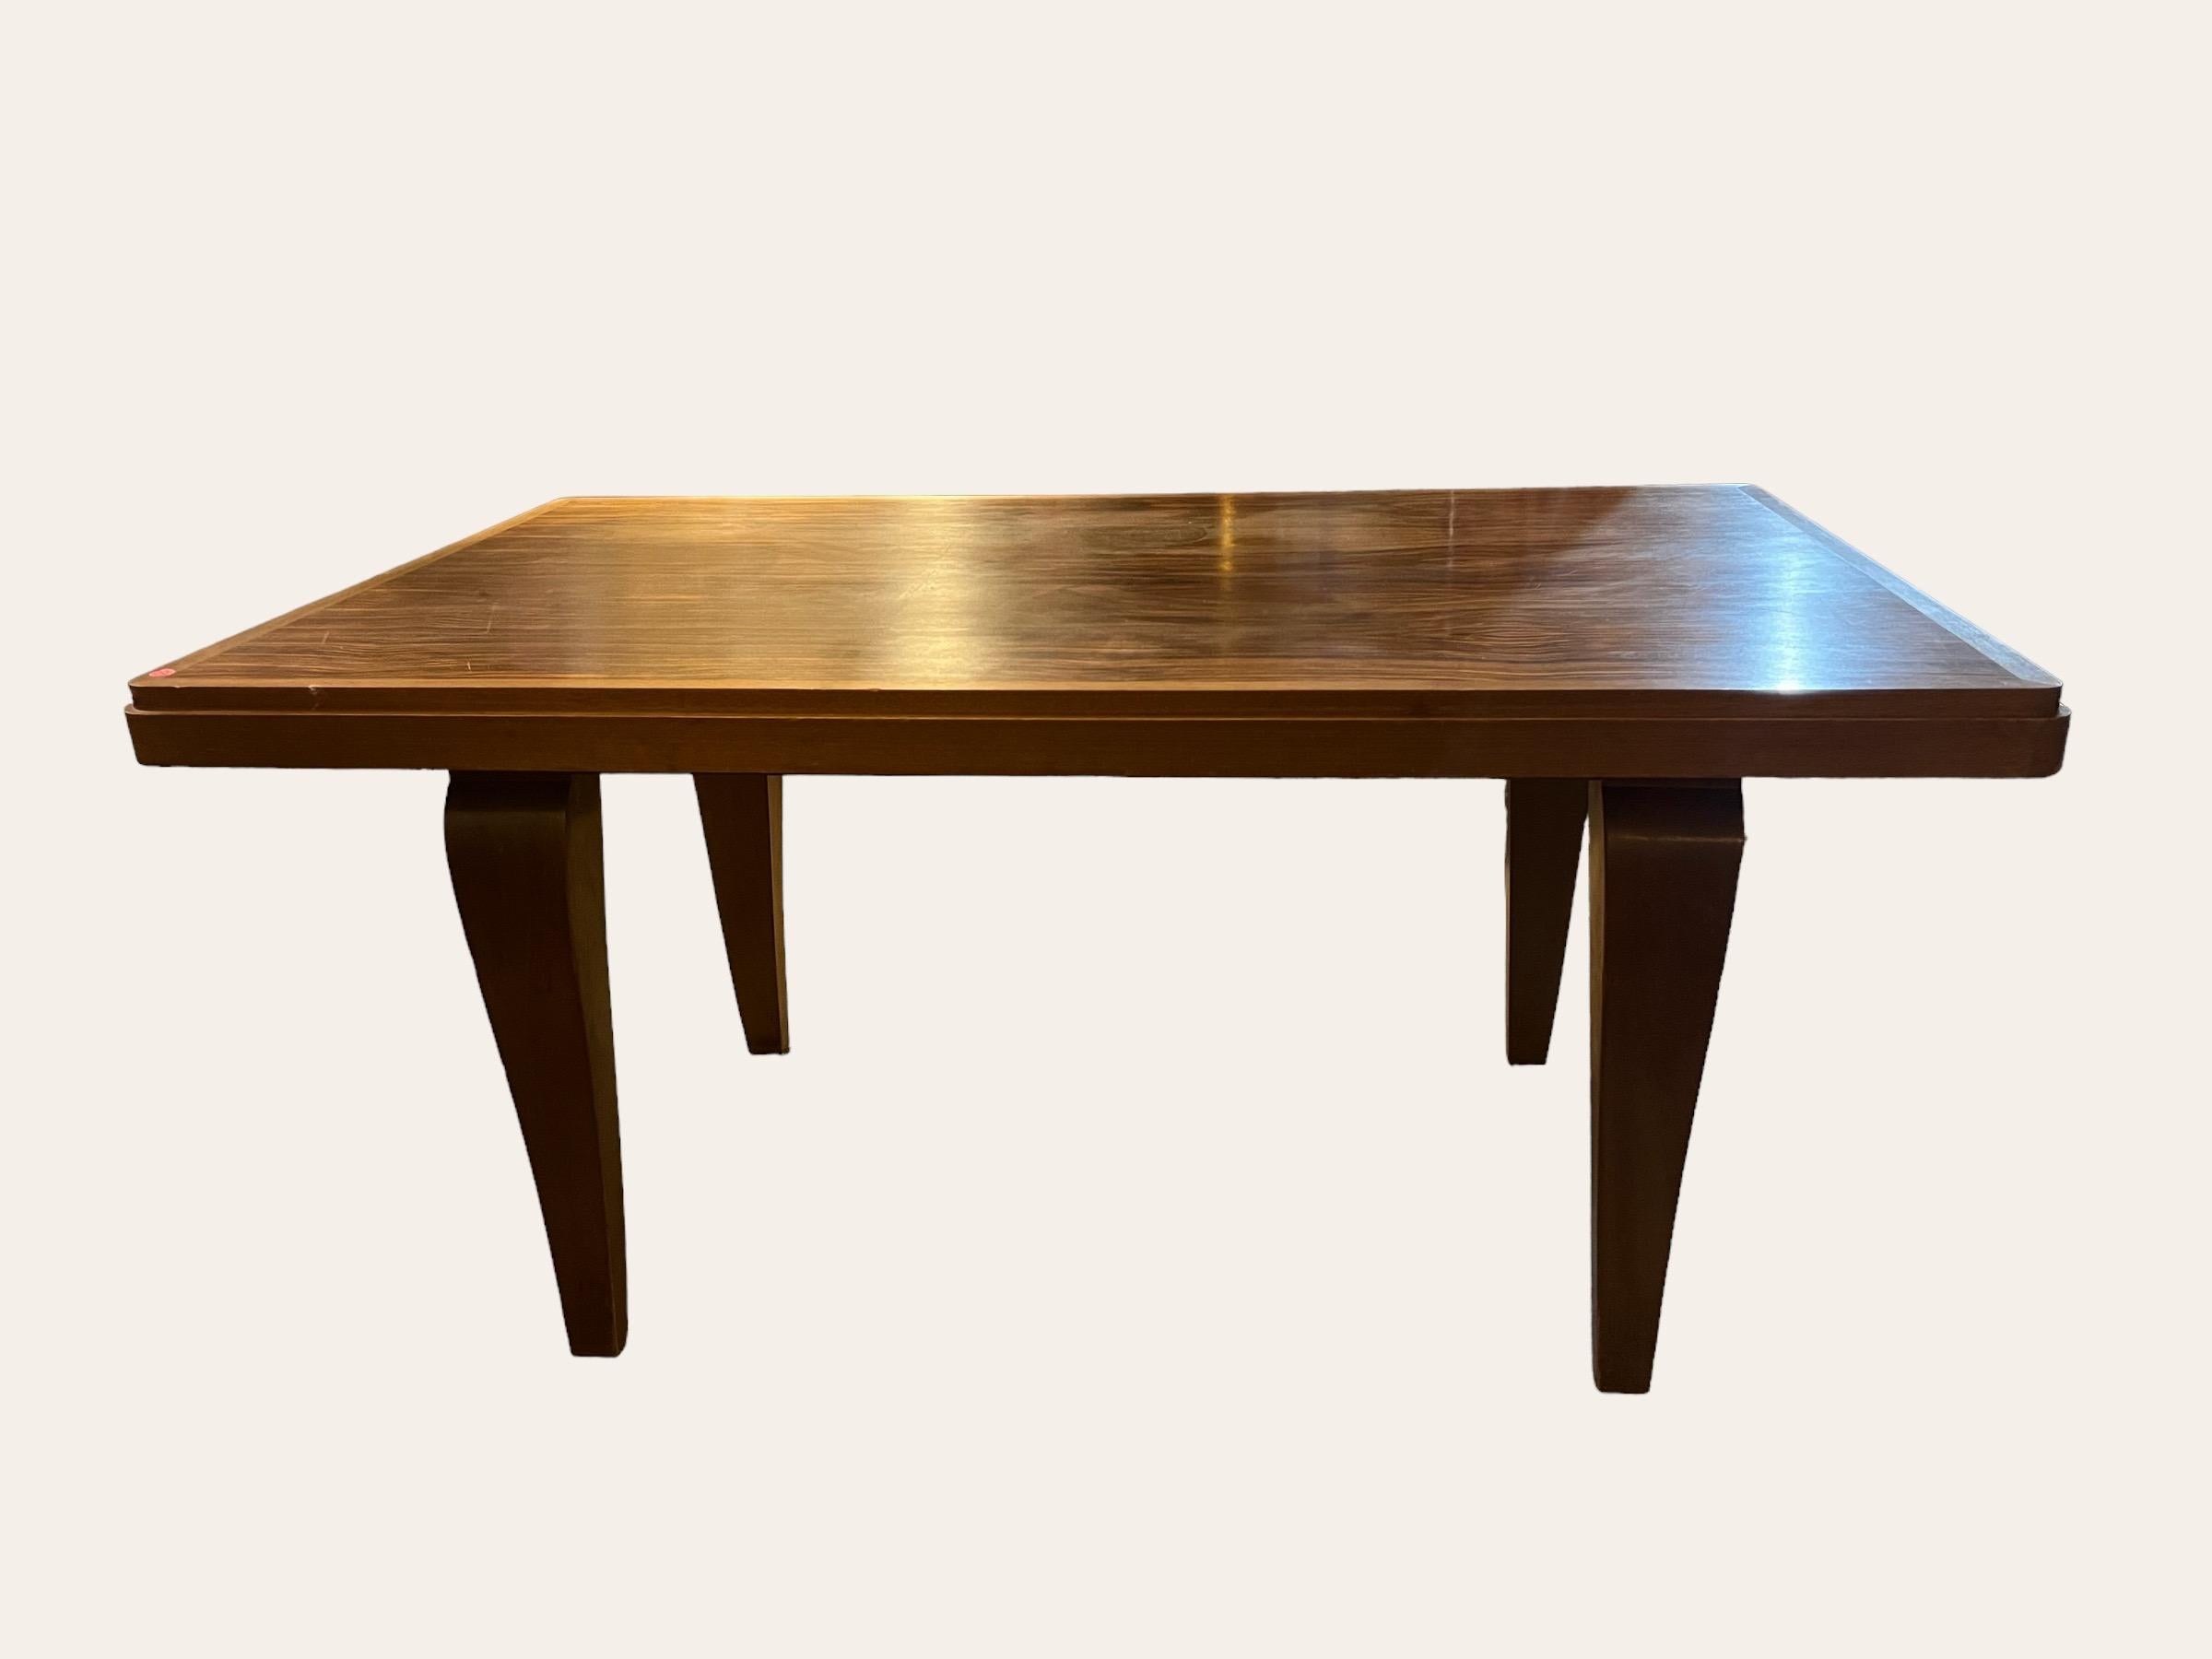 beautiful Art Deco dining table in a rare macassar ebony veneer
table attributed to Ateliers Vallin, Nancy, France 
table with two leaves of 45 centimeters each.